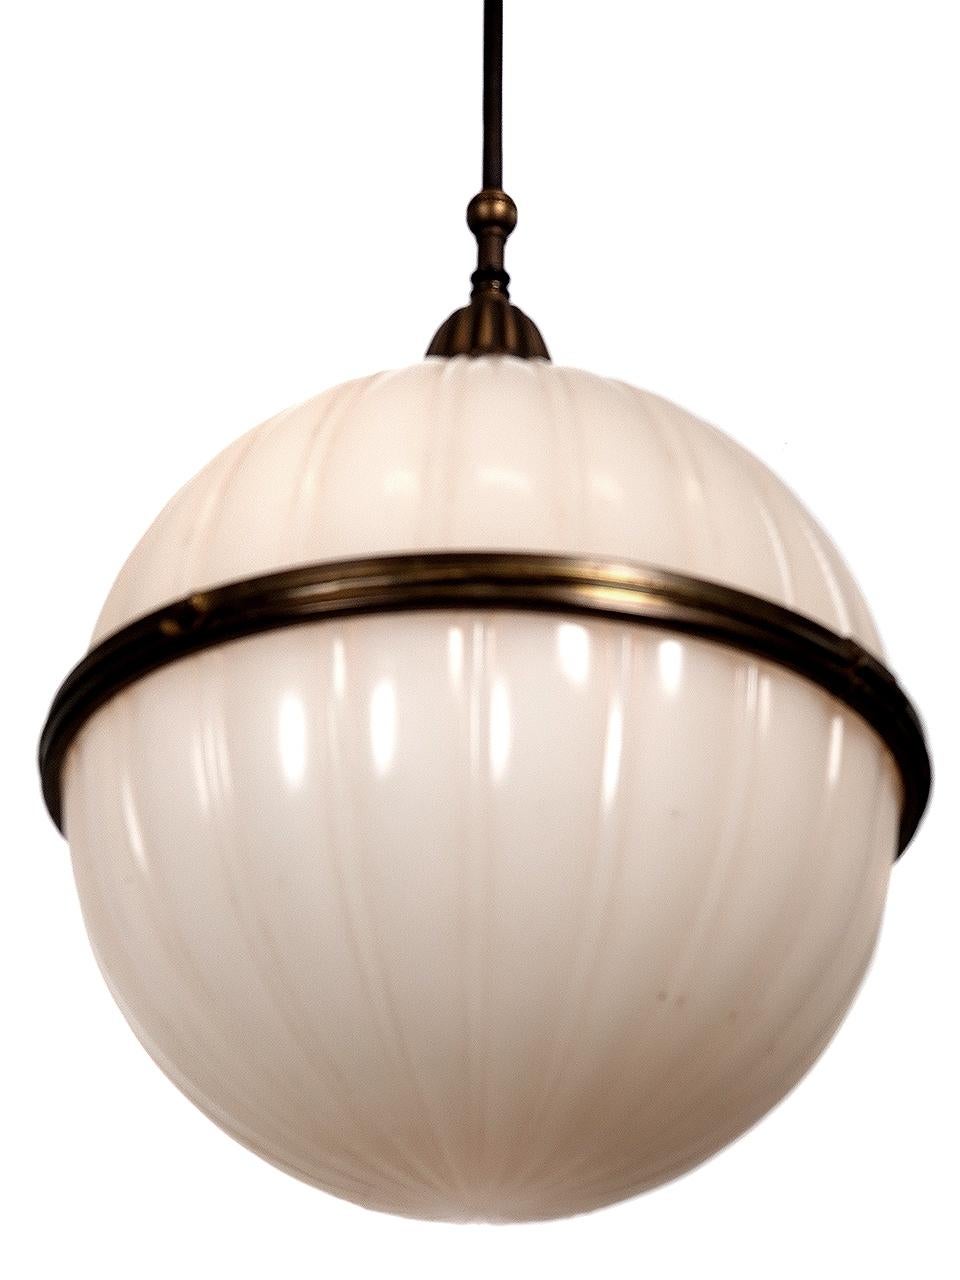 This large lamp is called a Split Globe because it is hinged in the center and opens to easily change the light bulb. The horizontal brass ring also adds to the lamps interest. The decorative and heavy cast brass crown also adds to the lamps unique